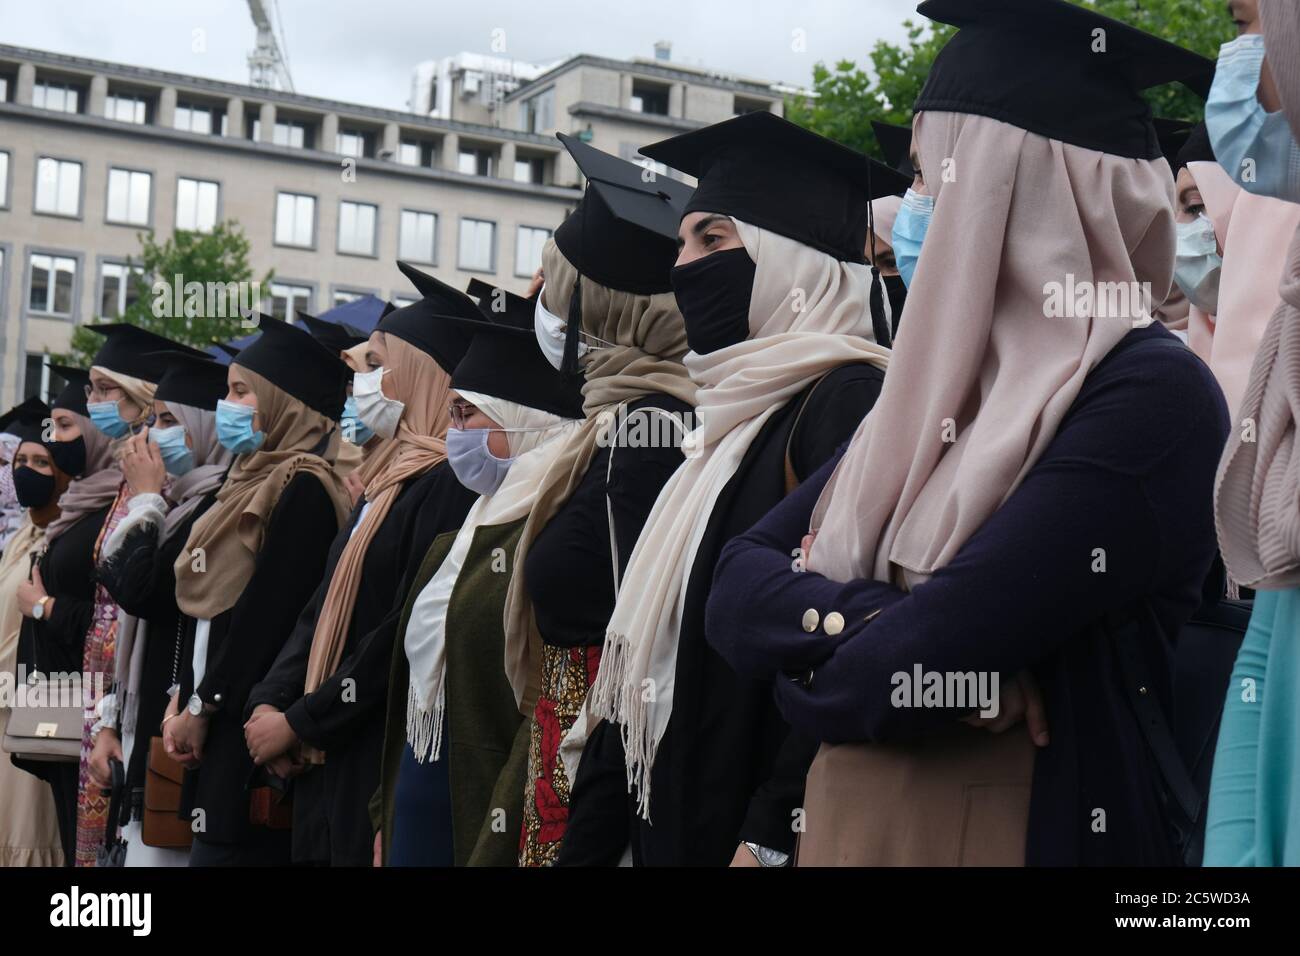 Brussels, Belgium. 5th July, 2020. Women wearing graduation hats over their  hijab during a demonstration called #